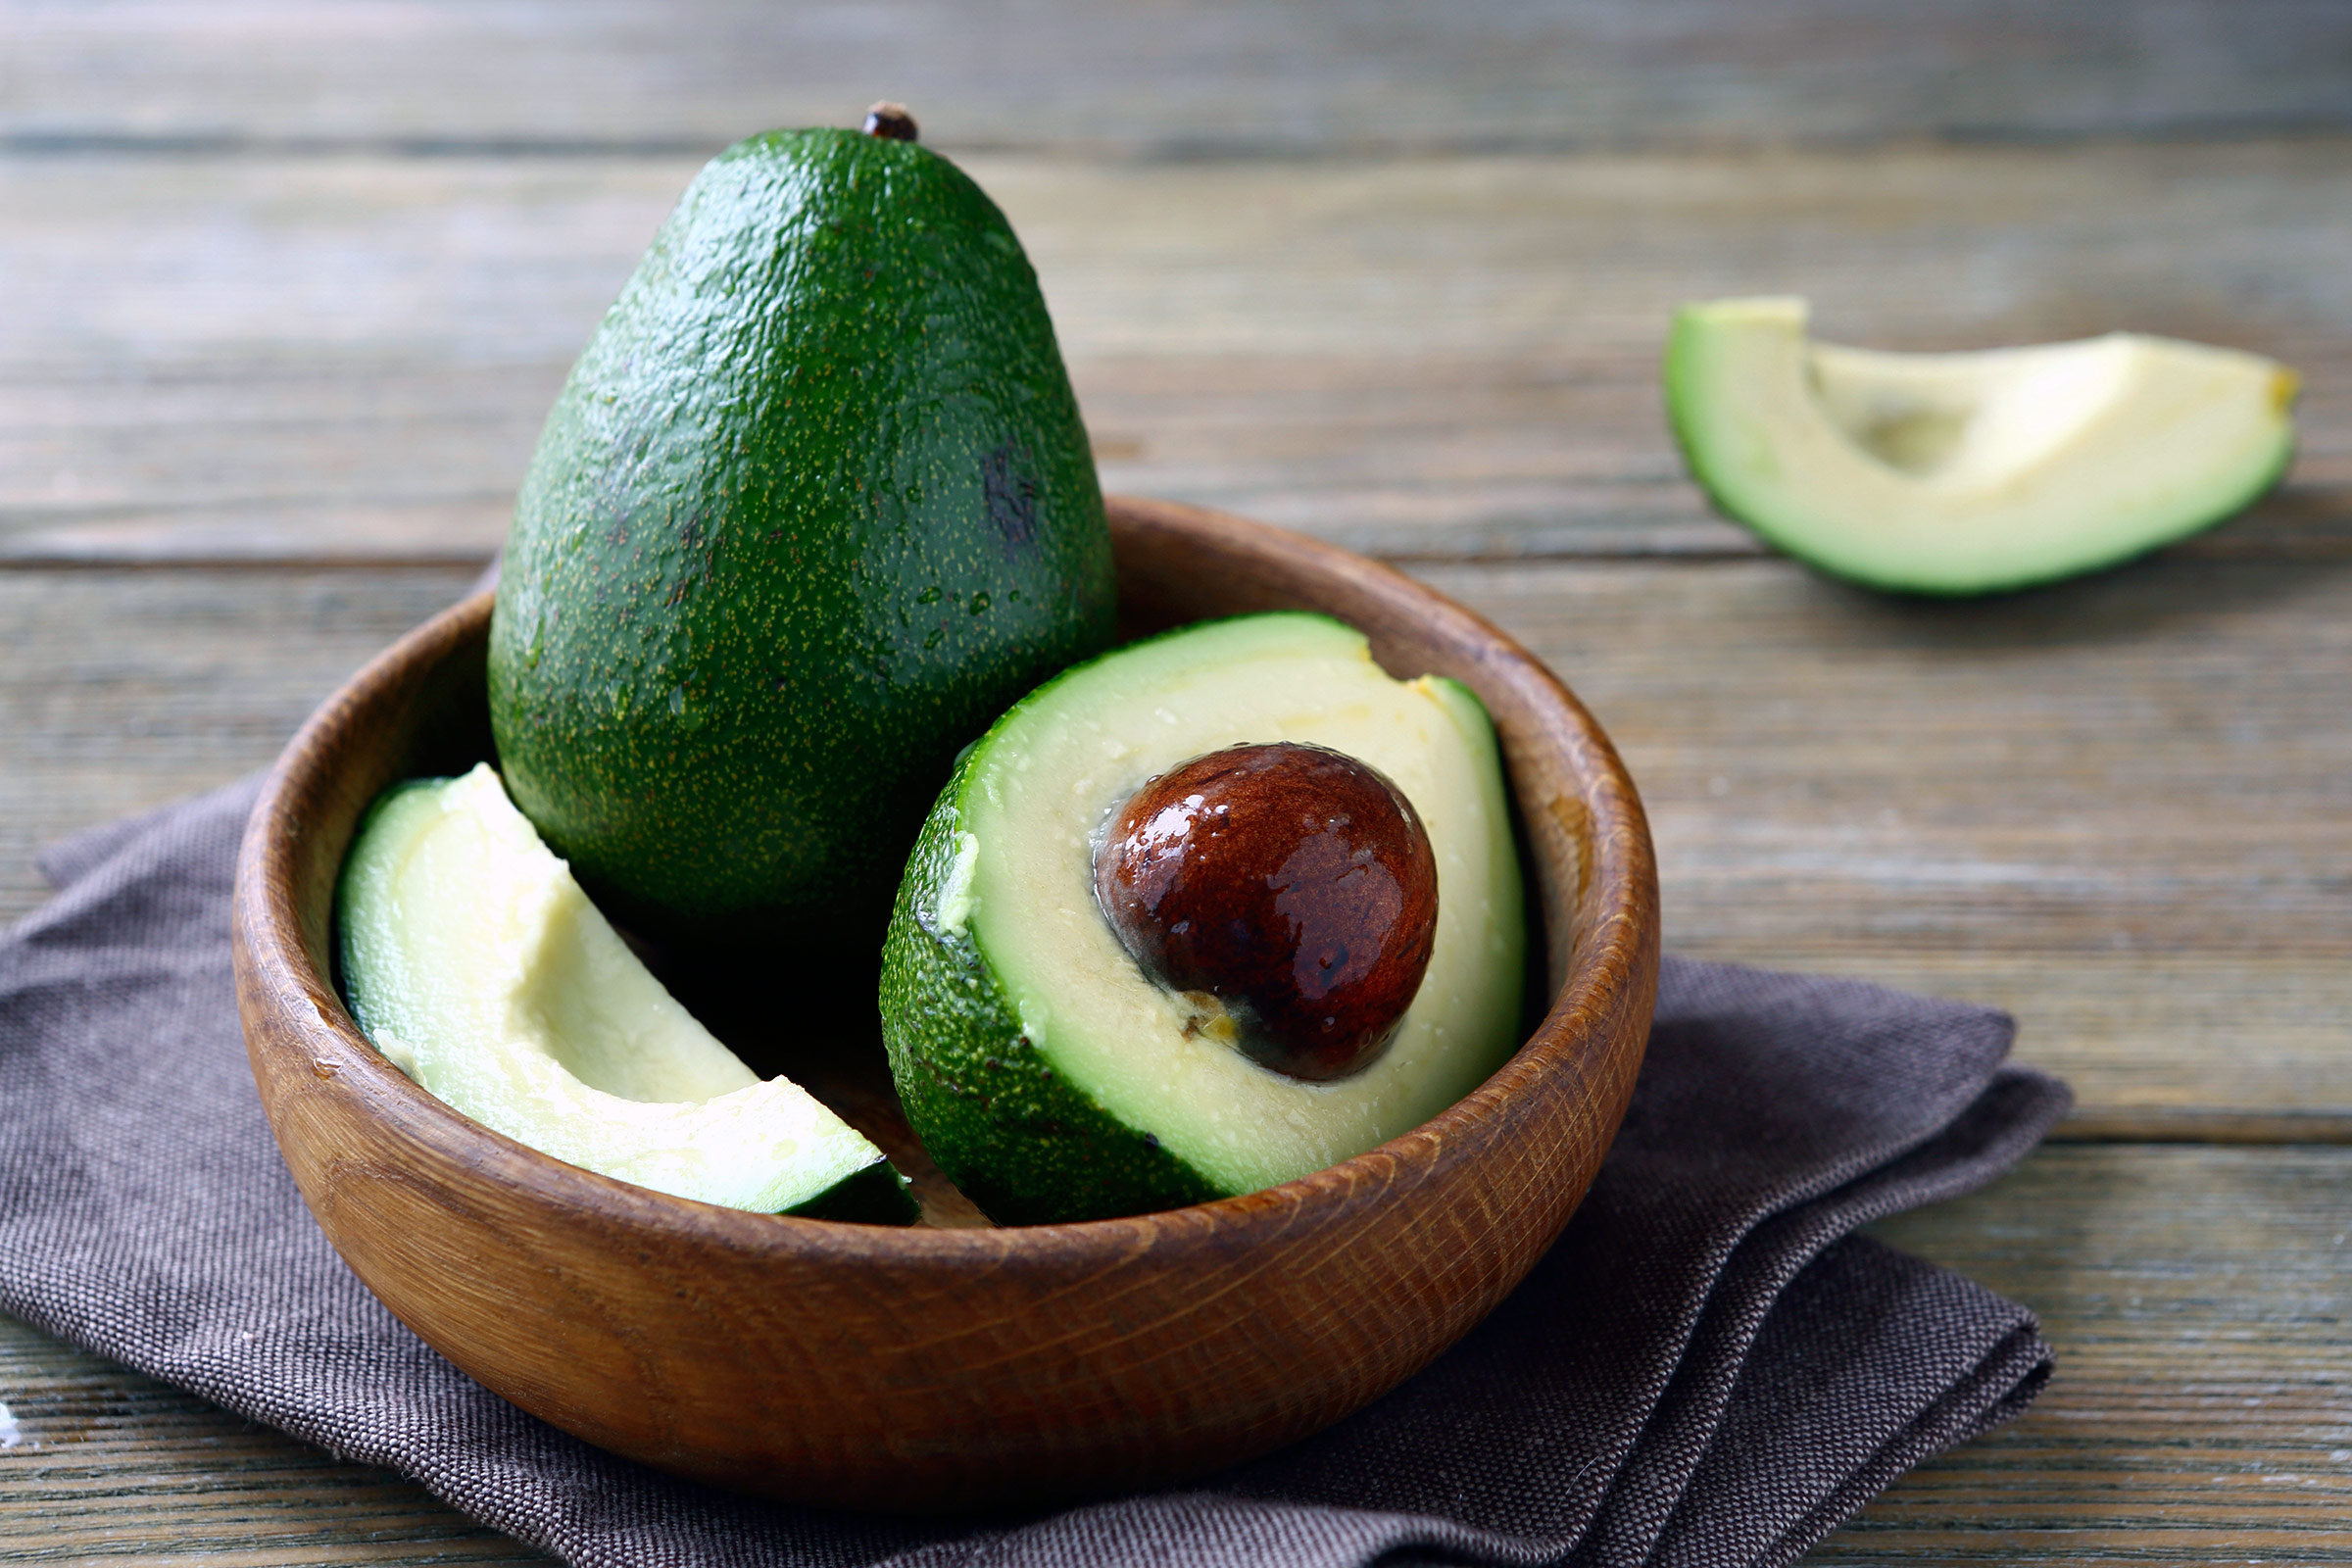 Avocado: A climacteric fruit, which matures on the tree but ripens off the tree. 2400x1600 HD Background.